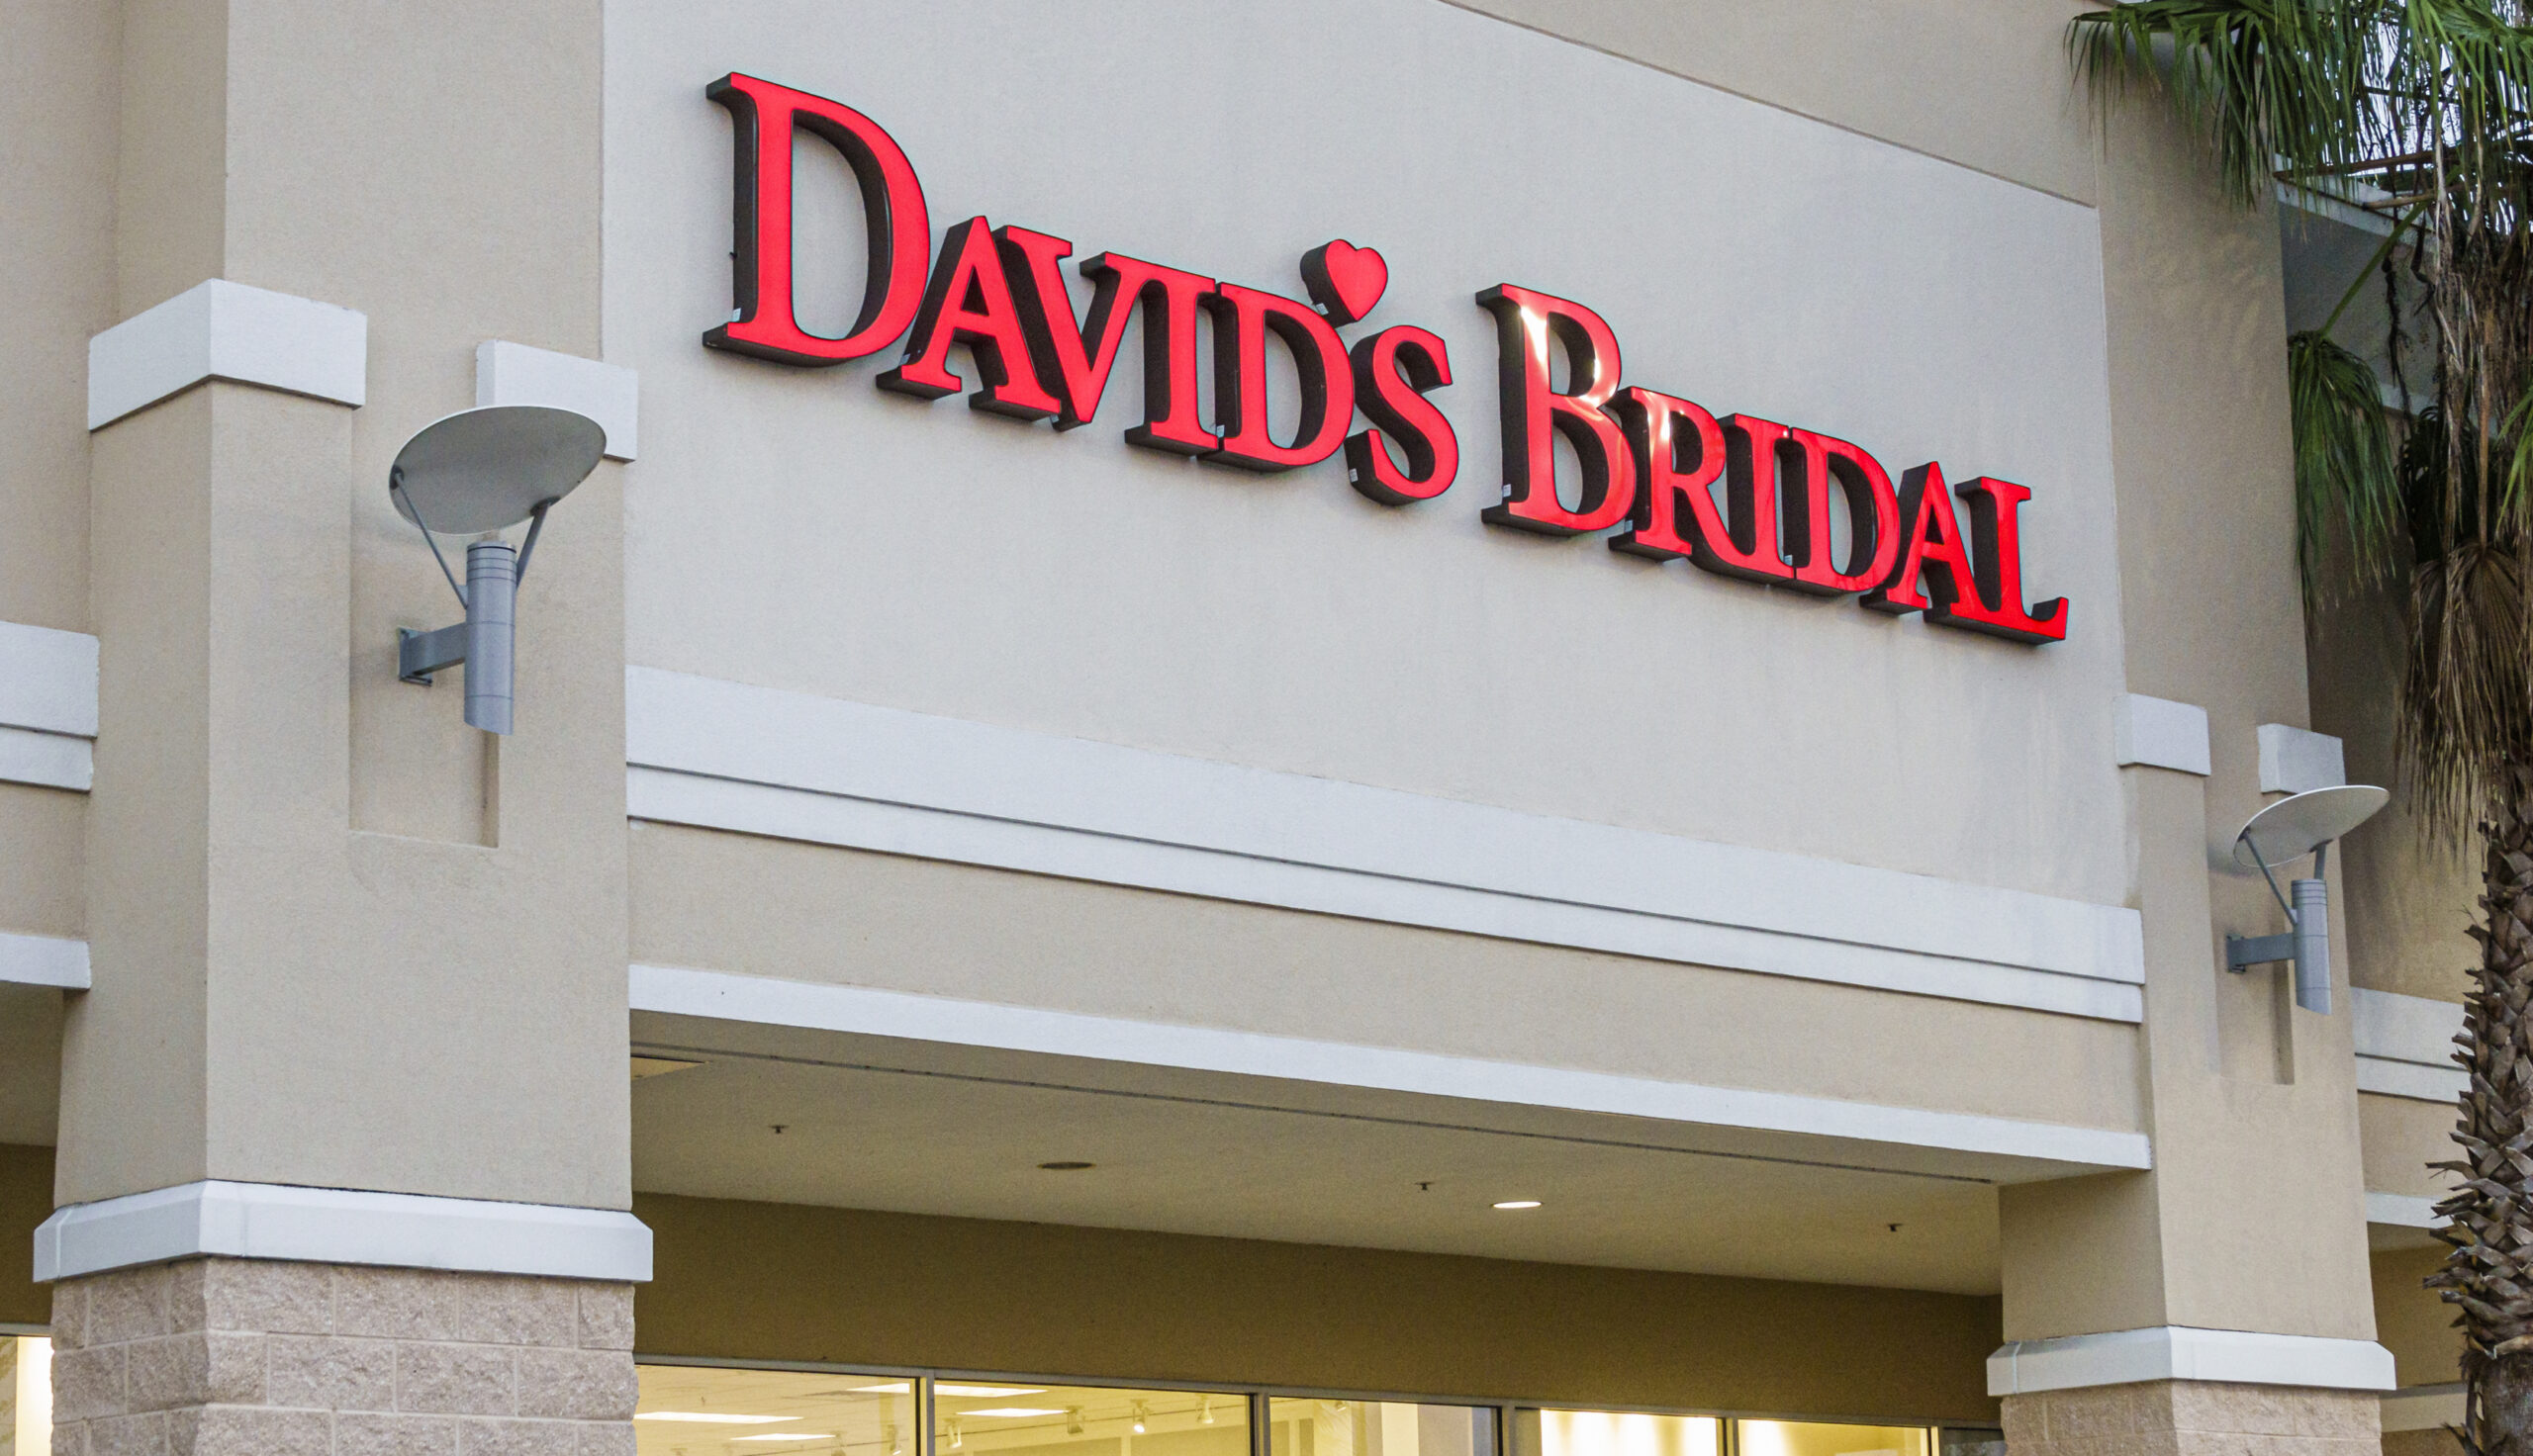 David’s Bridal, Largest Wedding Gown Retailer In U.S., Files For Bankruptcy After Laying Off 9,000 Employees